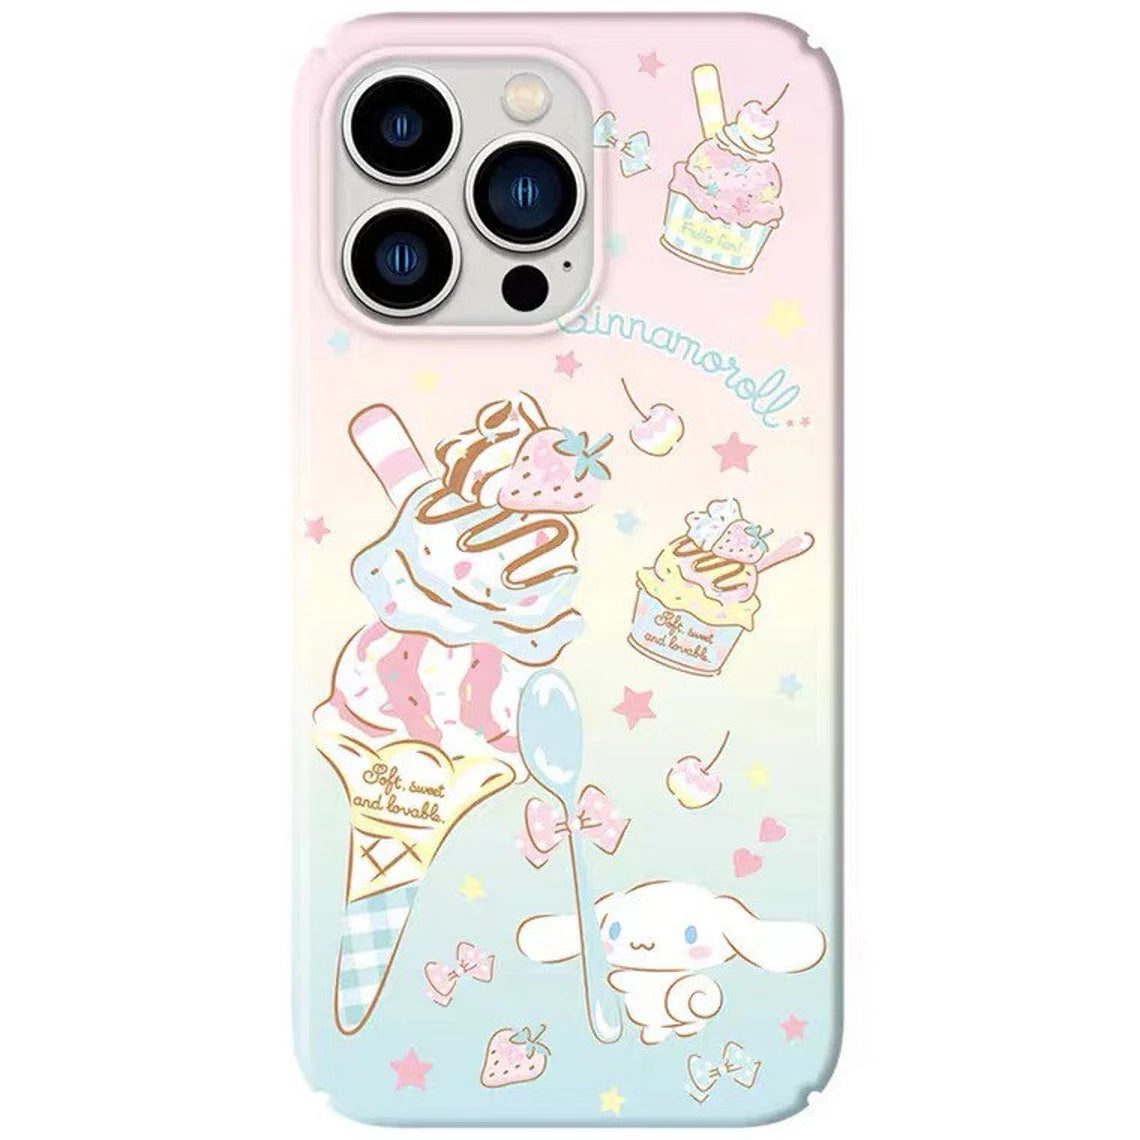 Japanese Cartoon CN with Ice Cream Sweets Deserts iPhone Case PLUS XS XR X 11 12 13 14 15 Pro Promax